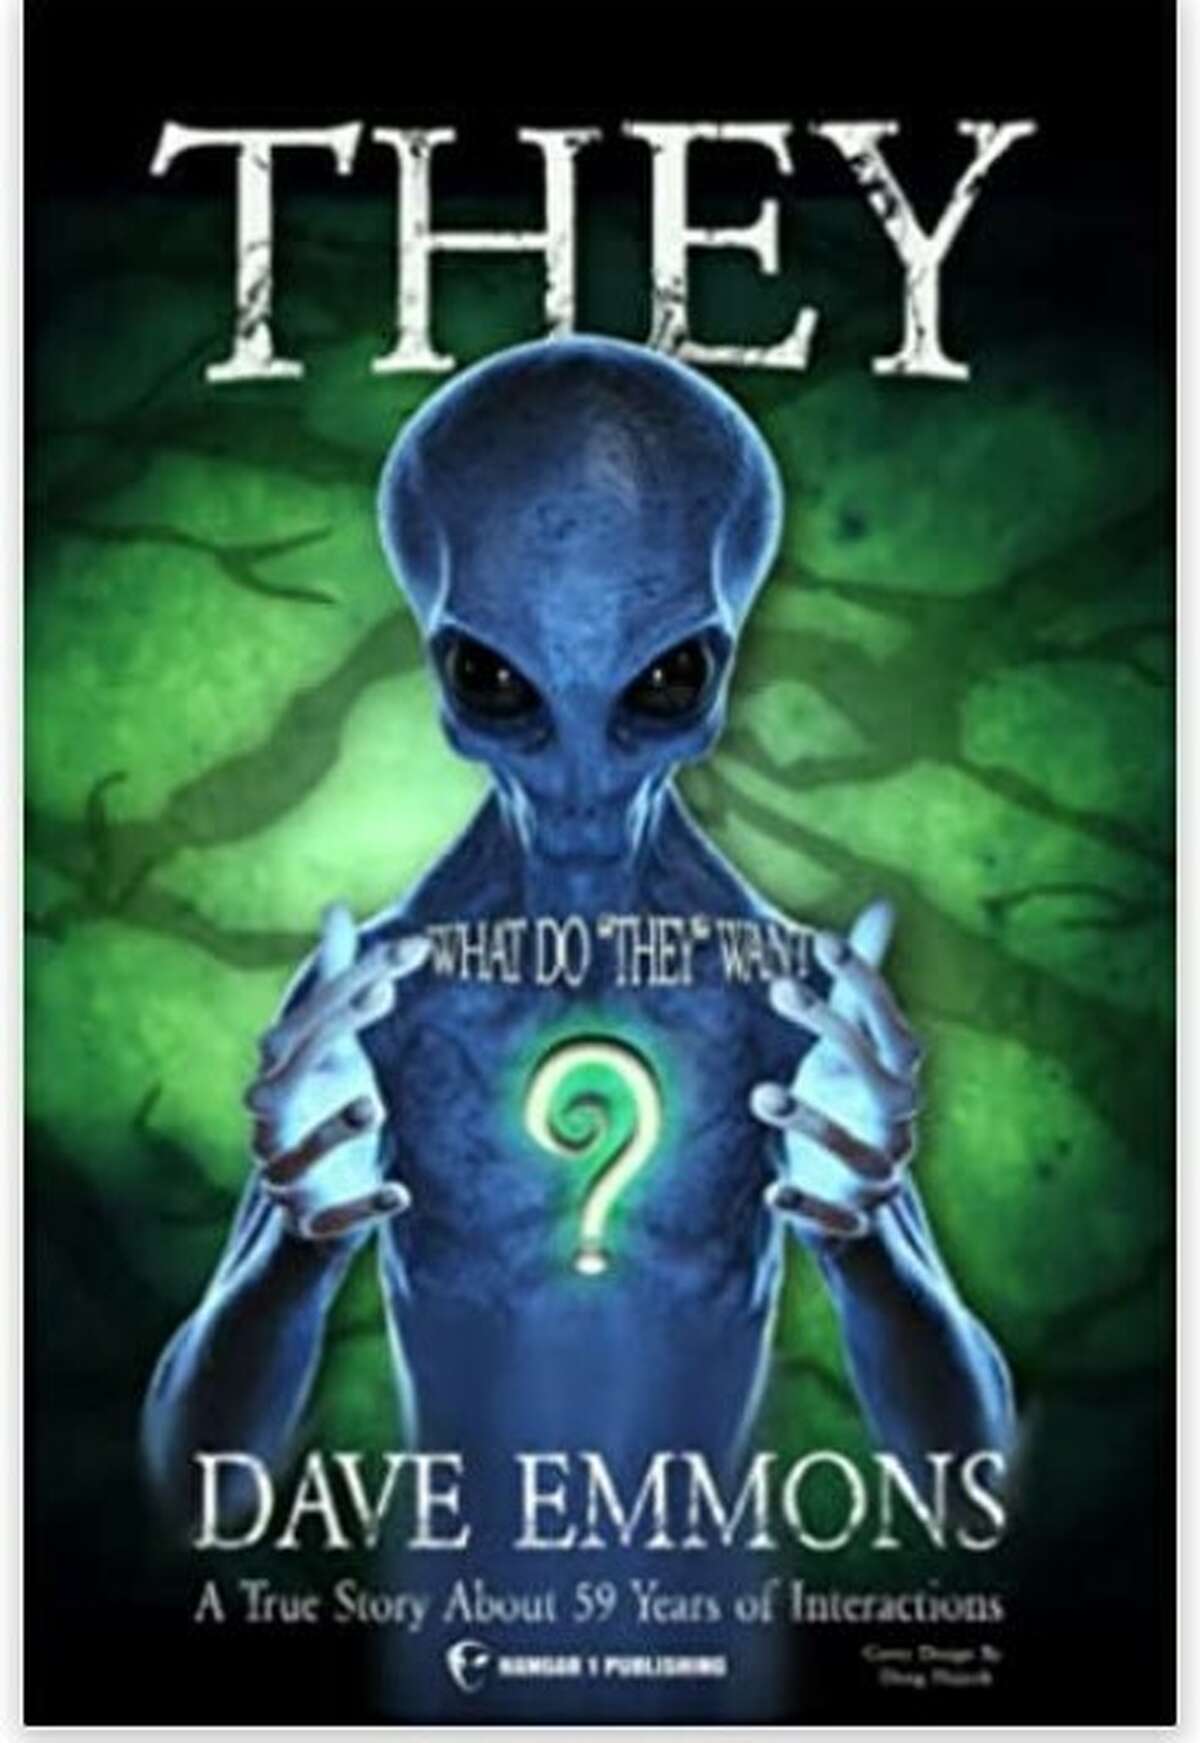 Dave Emmons has published his first book about his otherworldly UFO and ET experiences, “They: What Do ‘They’ Want?” now available at all major booksellers.